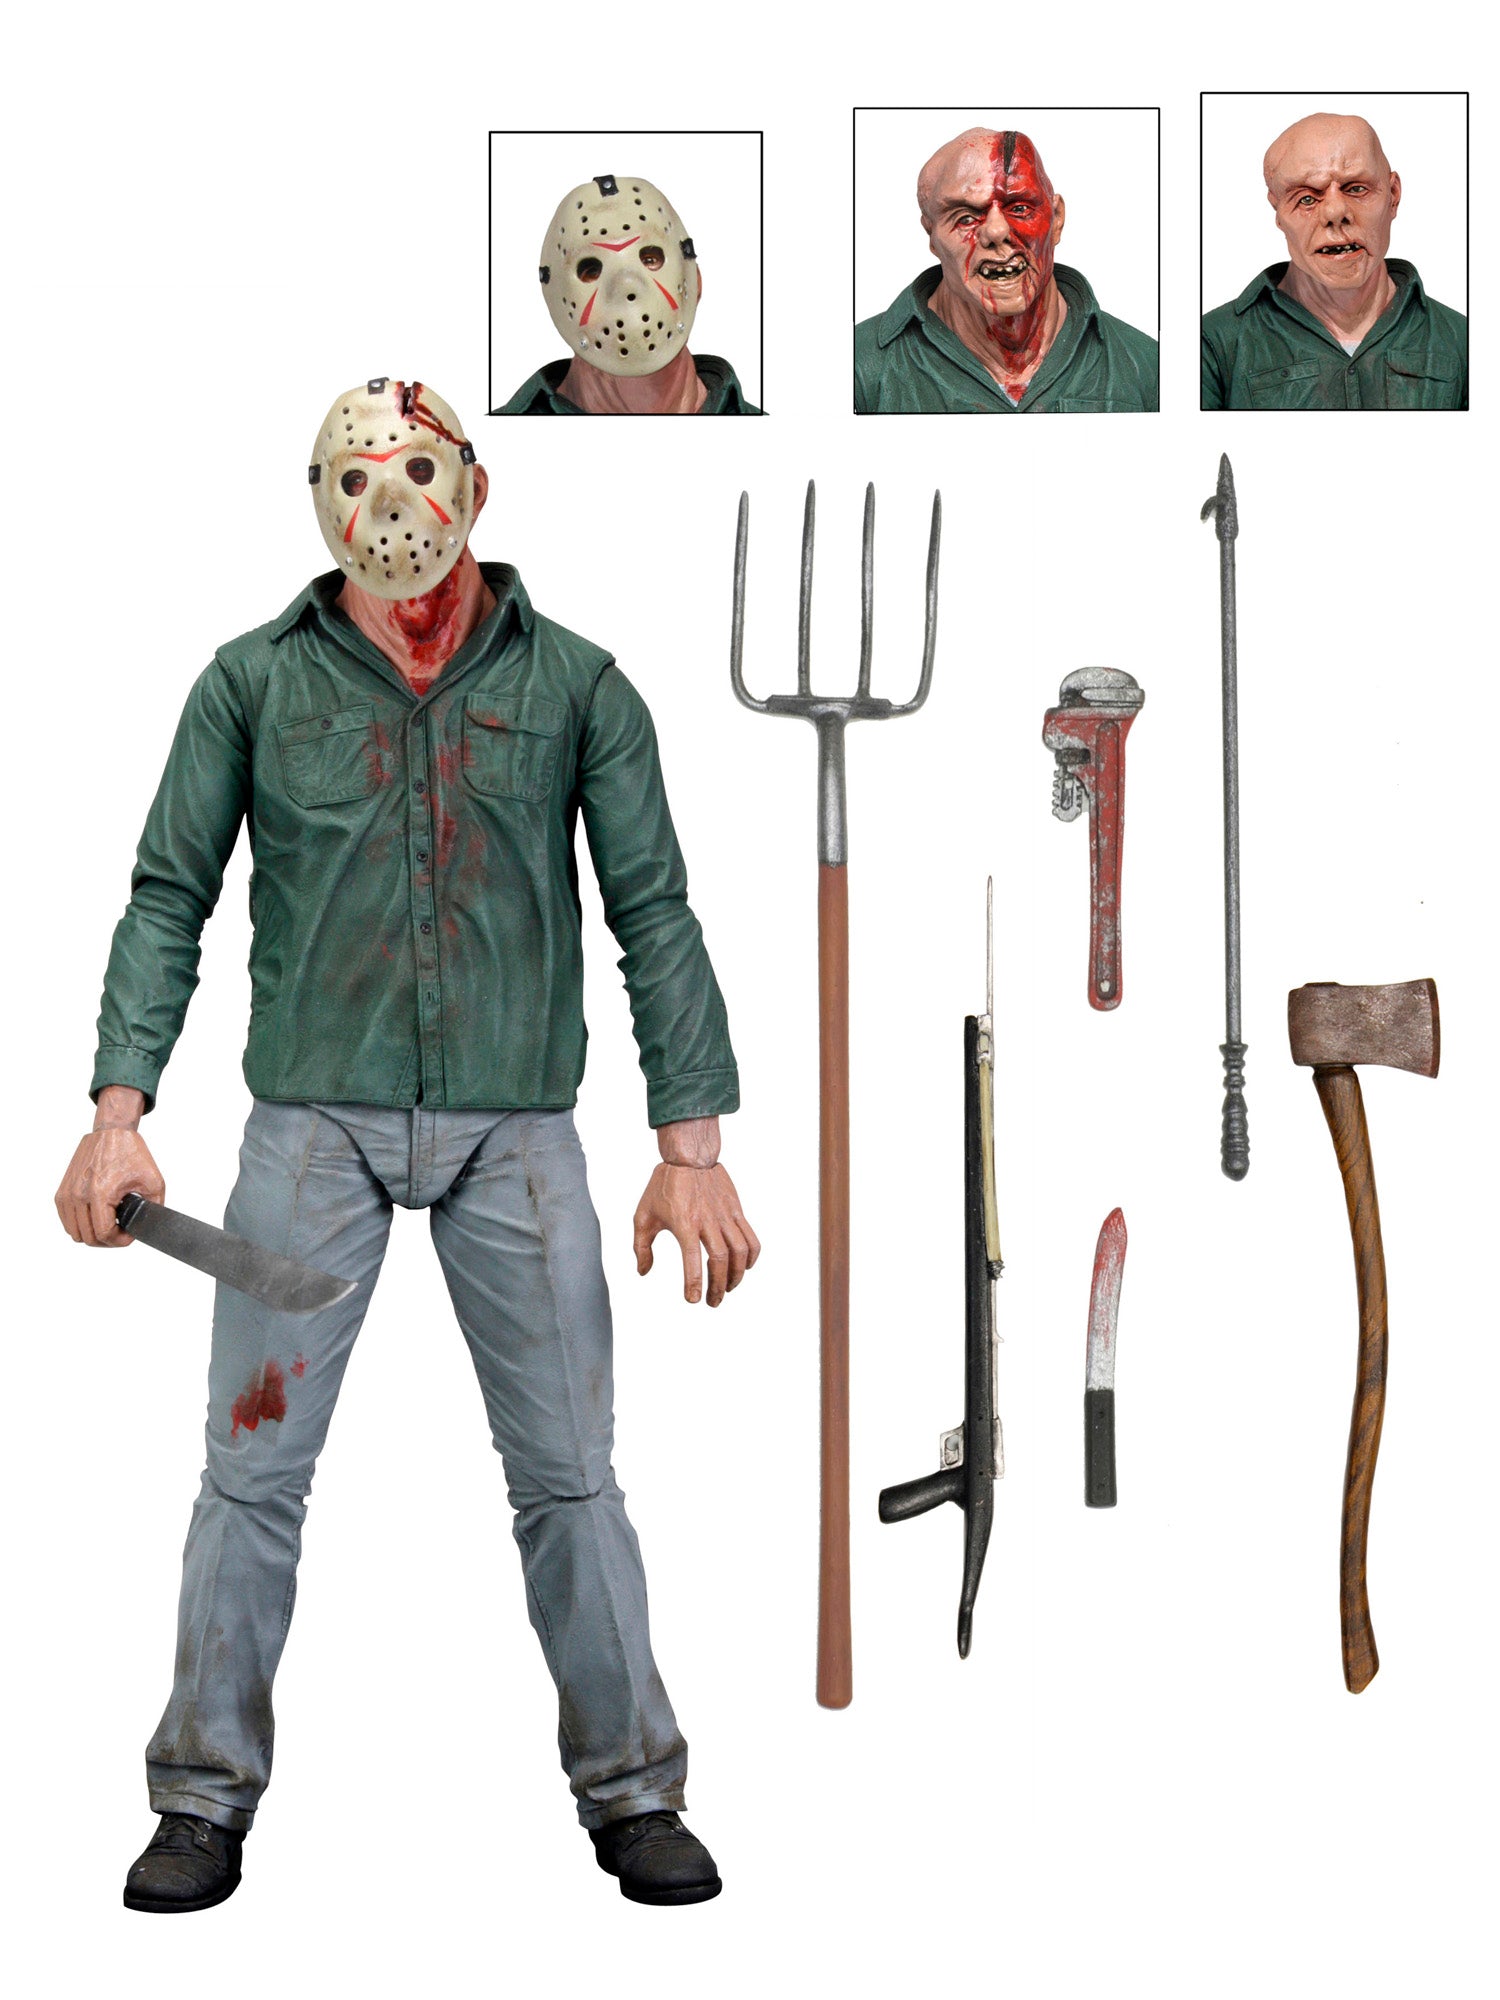 Friday the 13th - 7" Action Figure - Ultimate Part 3 Jason - costumes.com